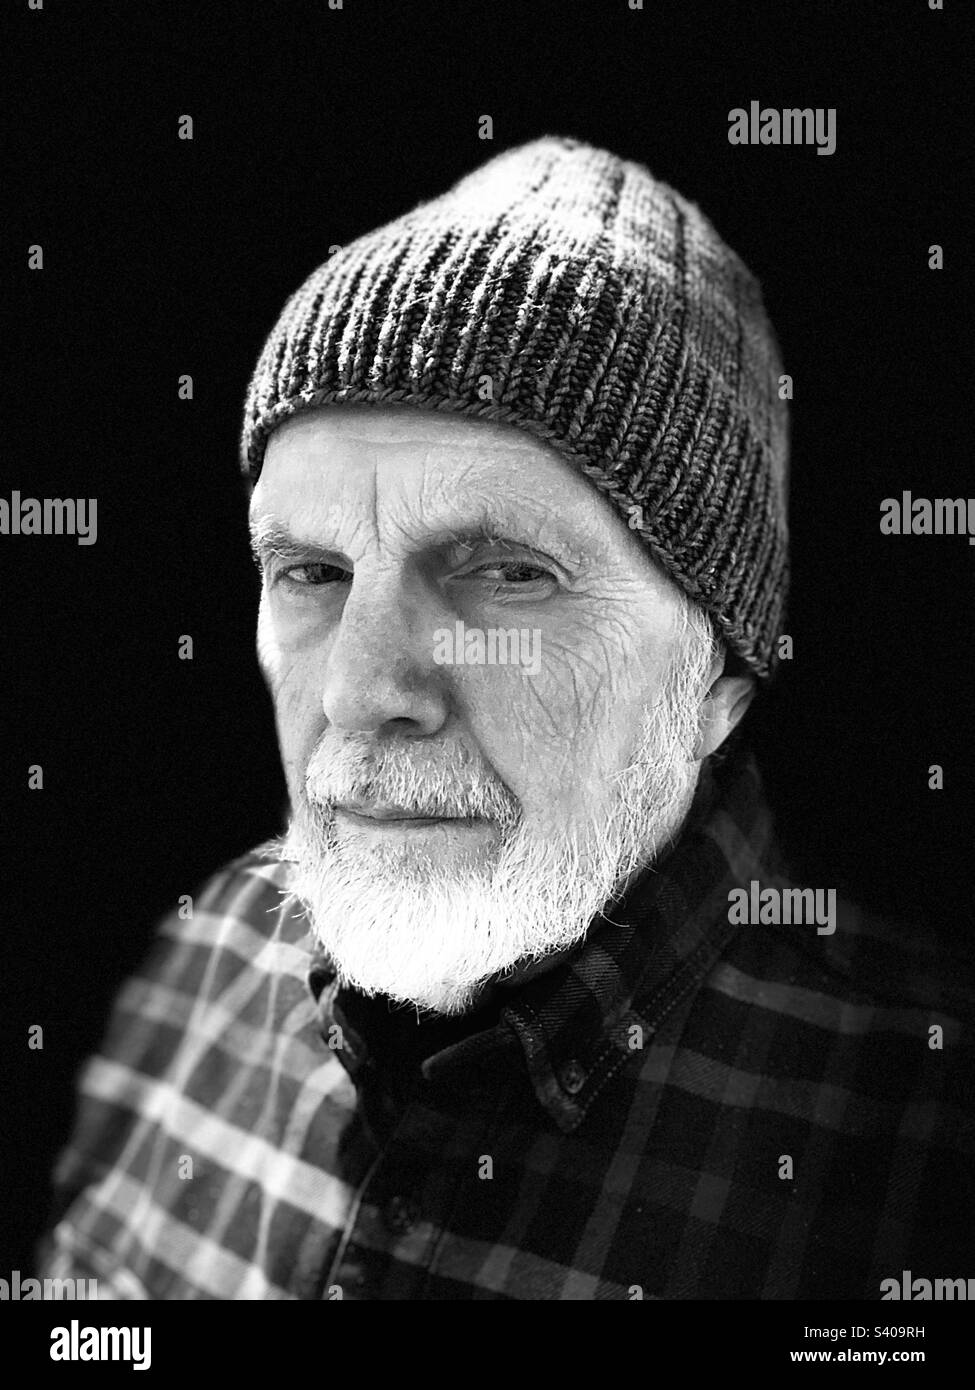 Old man with hat, in black and white Stock Photo